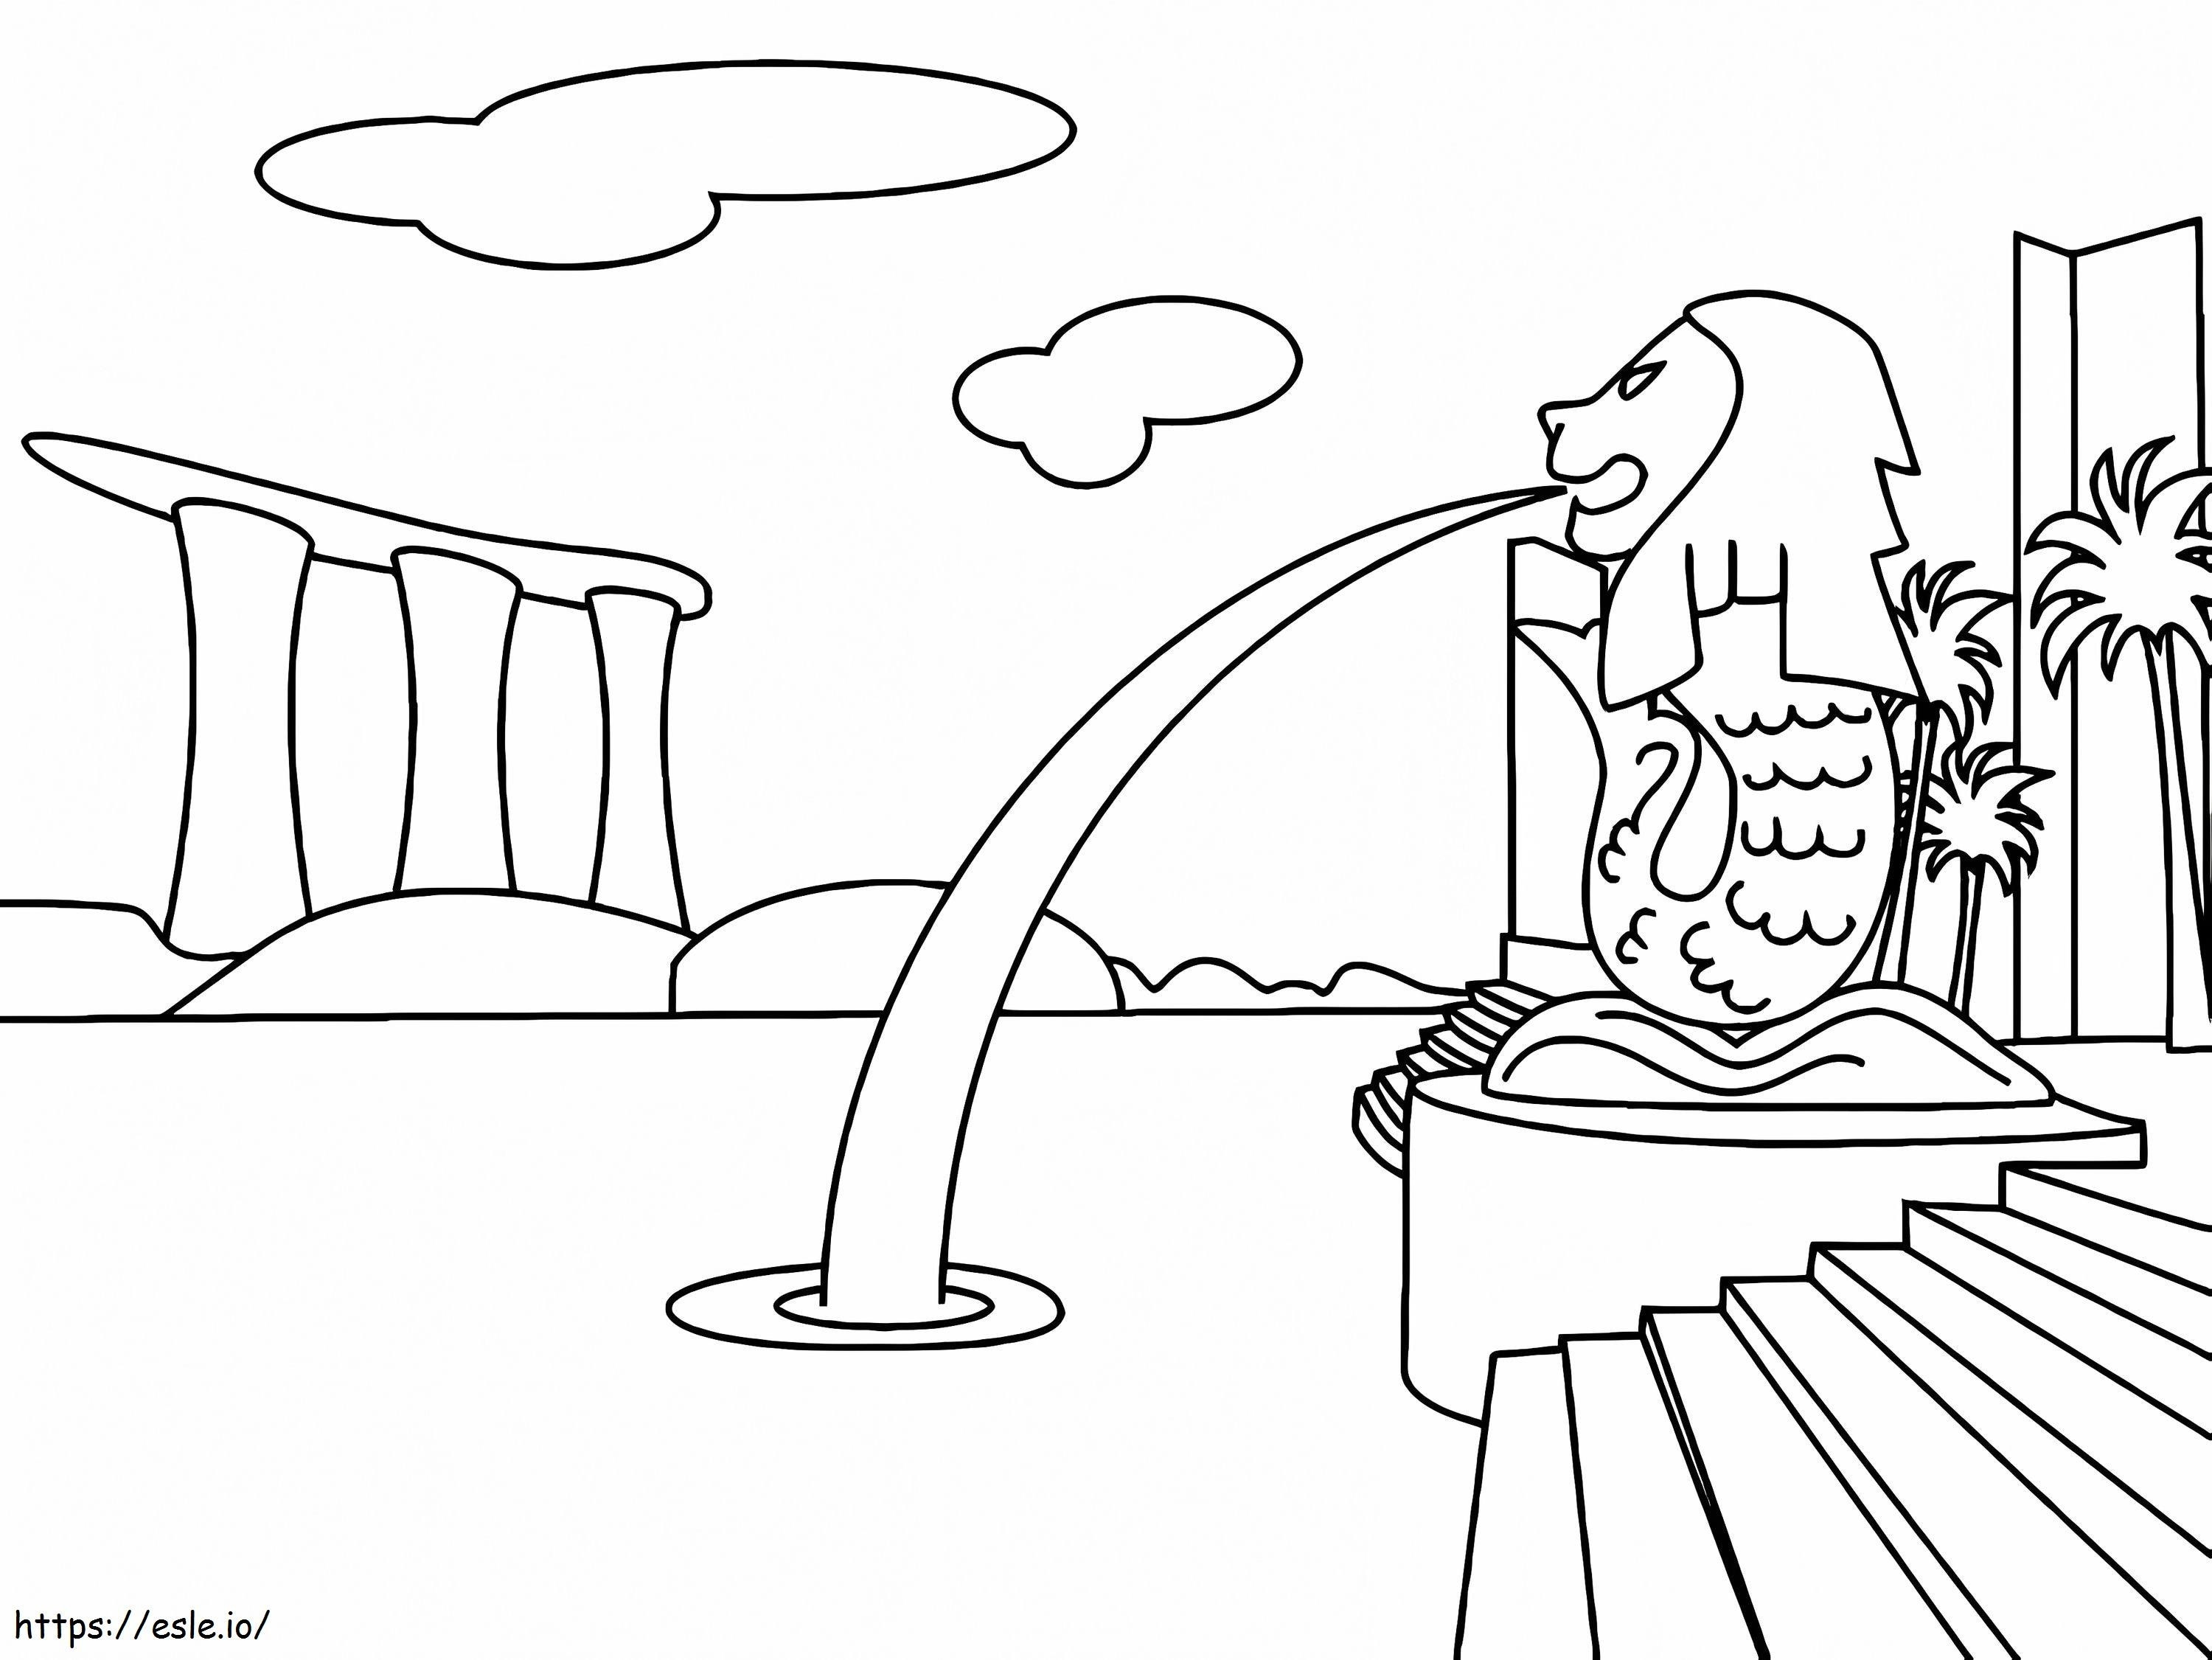 Merlion 2 coloring page